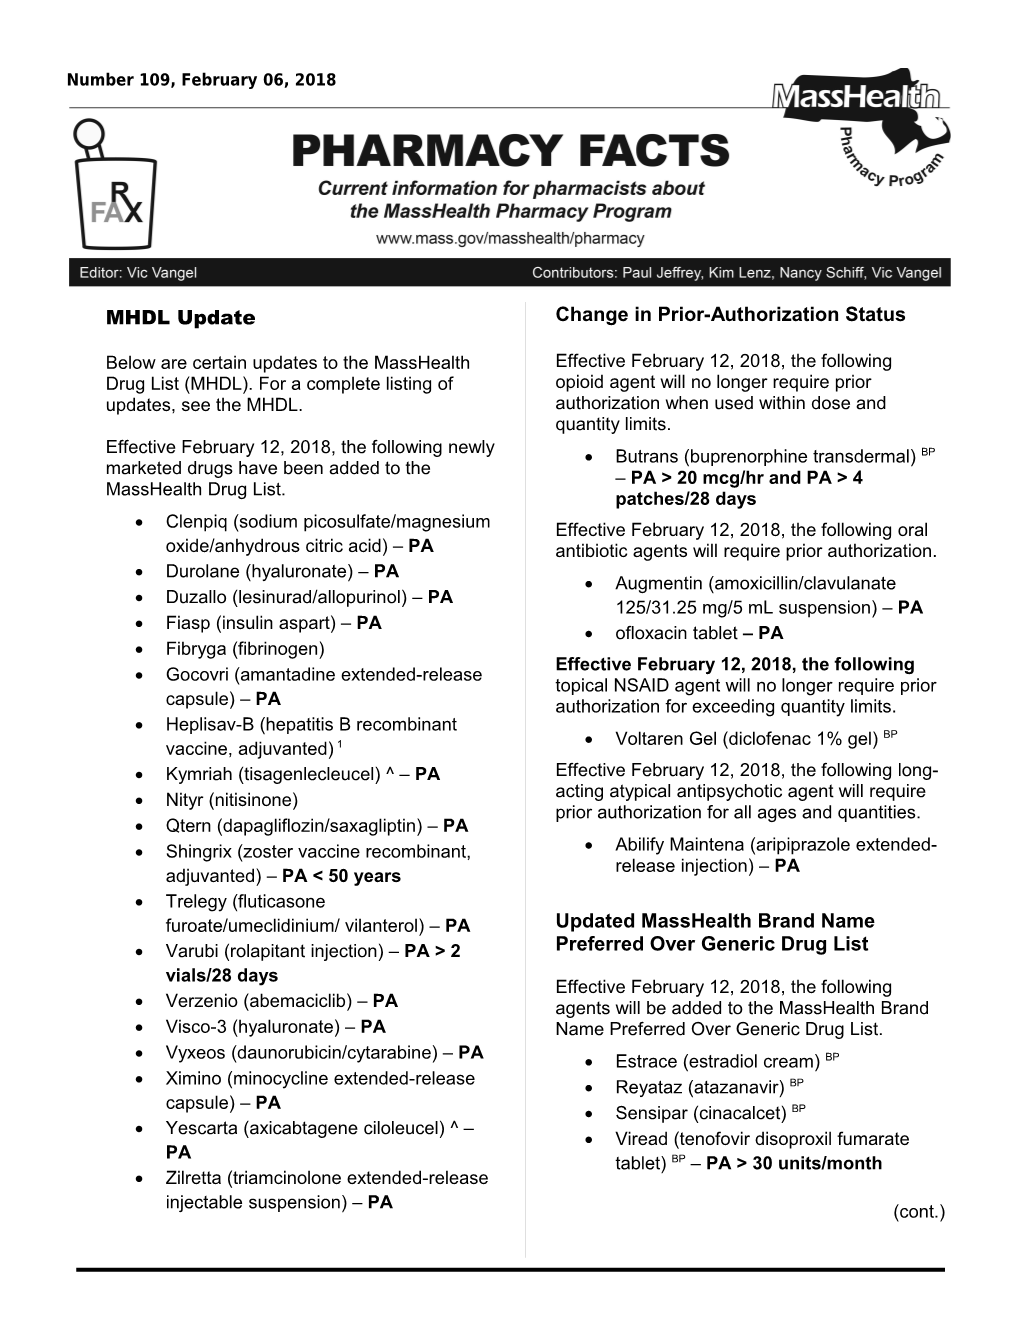 Pharmacy Facts, Number 109Page 1 of 2